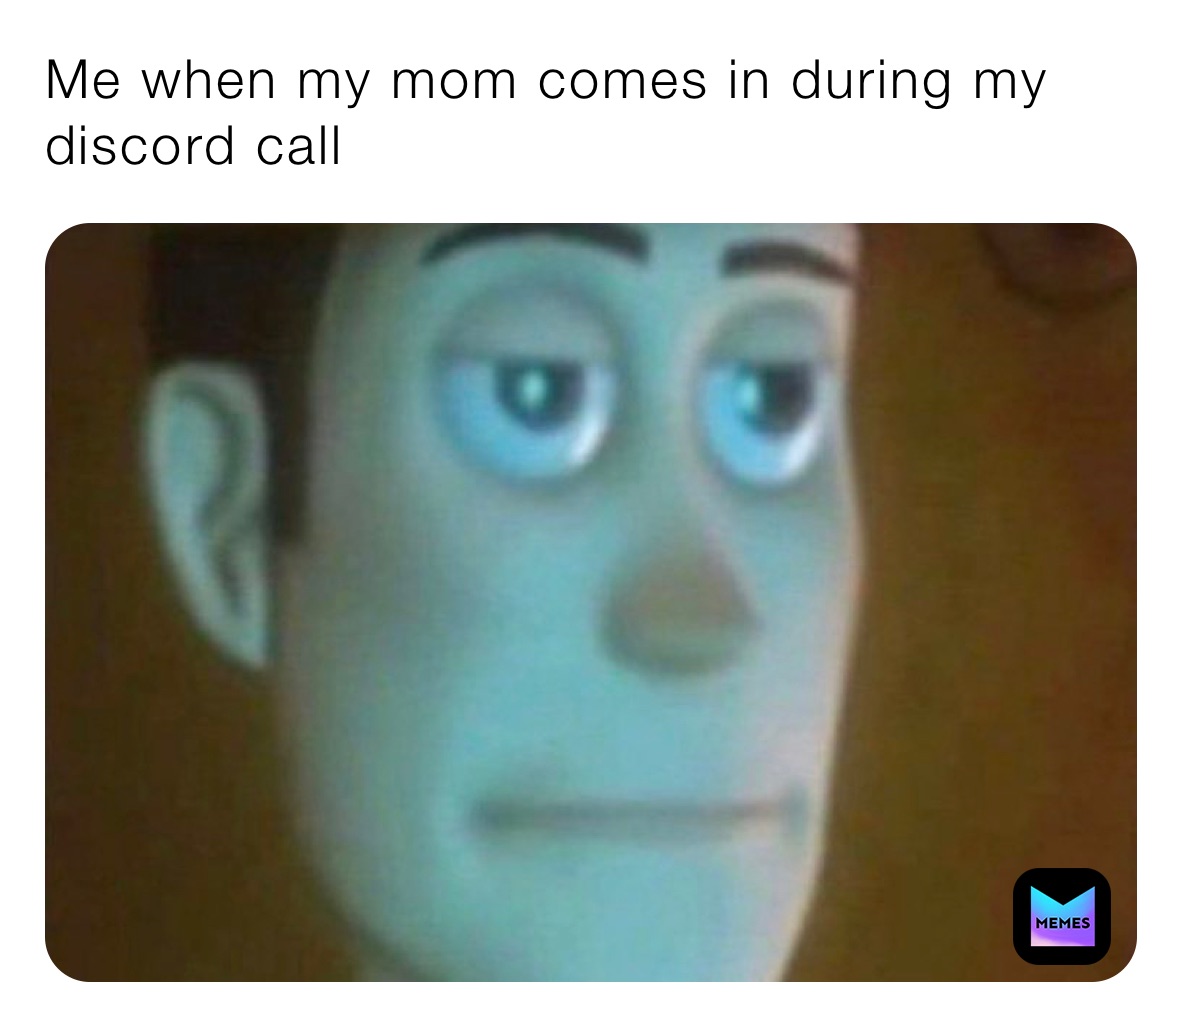 Me when my mom comes in during my discord call